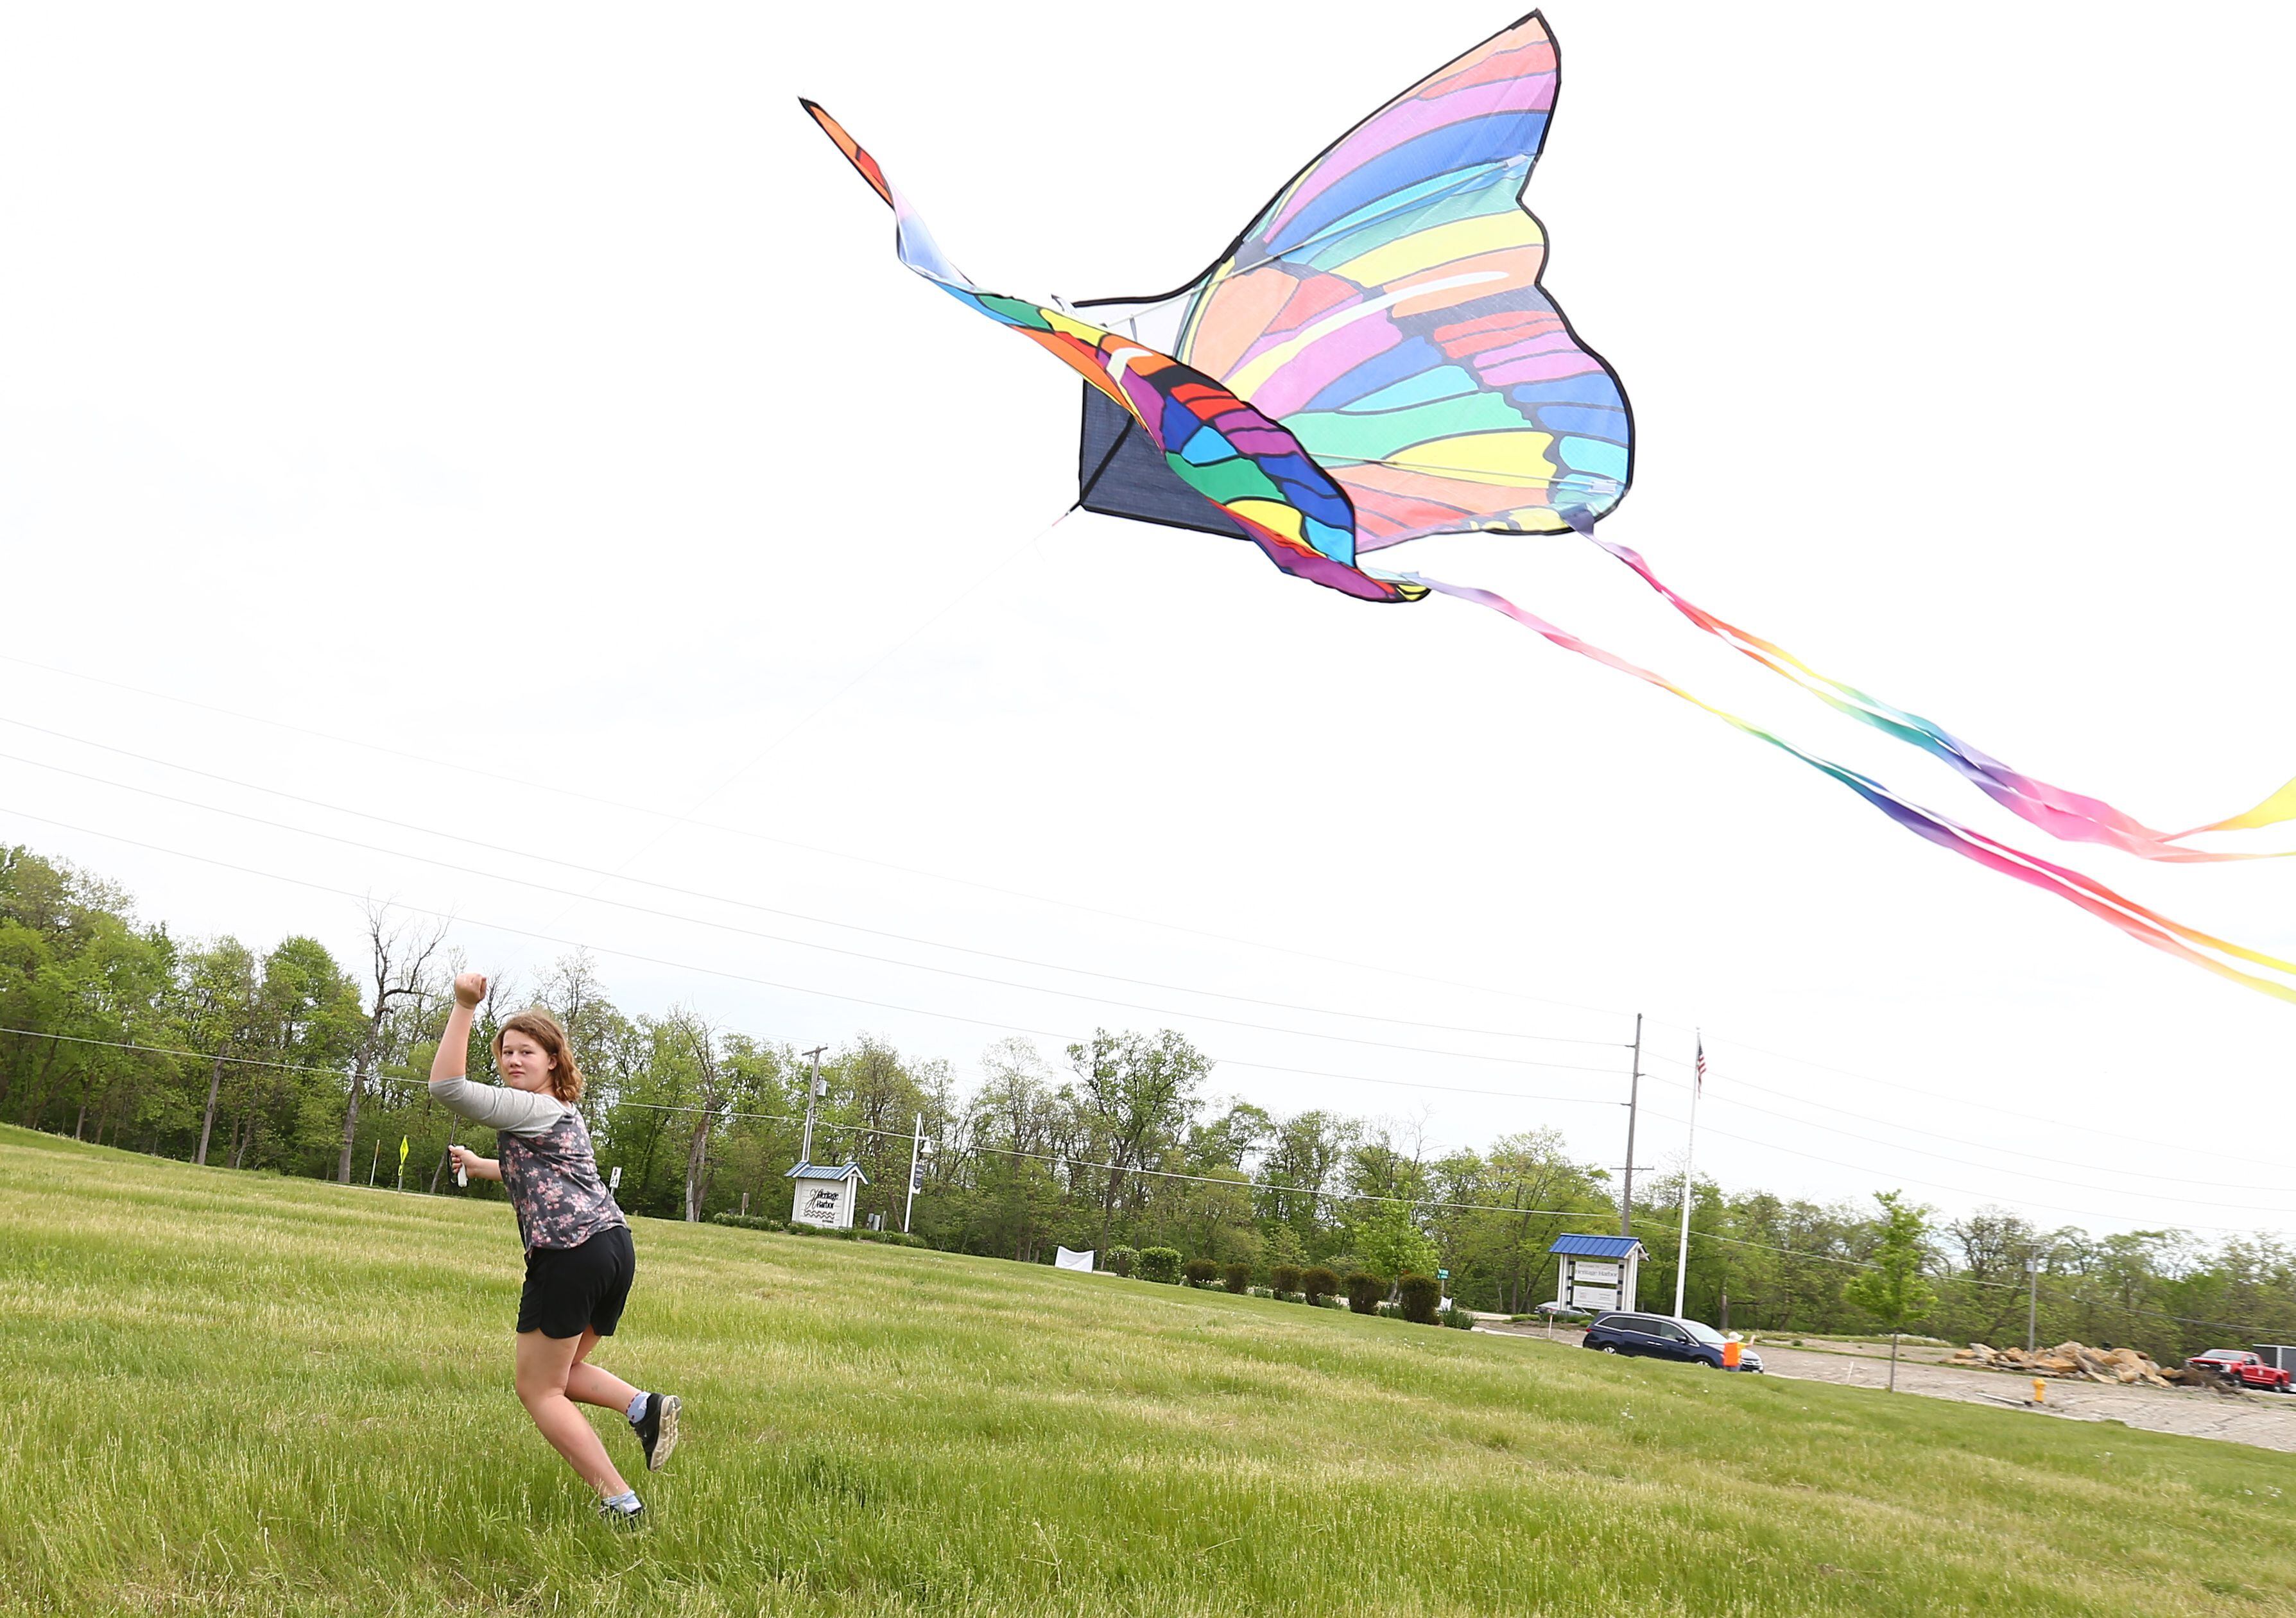 Marli Woodin of Norway runs through a large open field to fly her butterfly kite during the 'Kites in Flight' festival on Sunday, May 15, 2022 at Heritage Harbor in Ottawa.